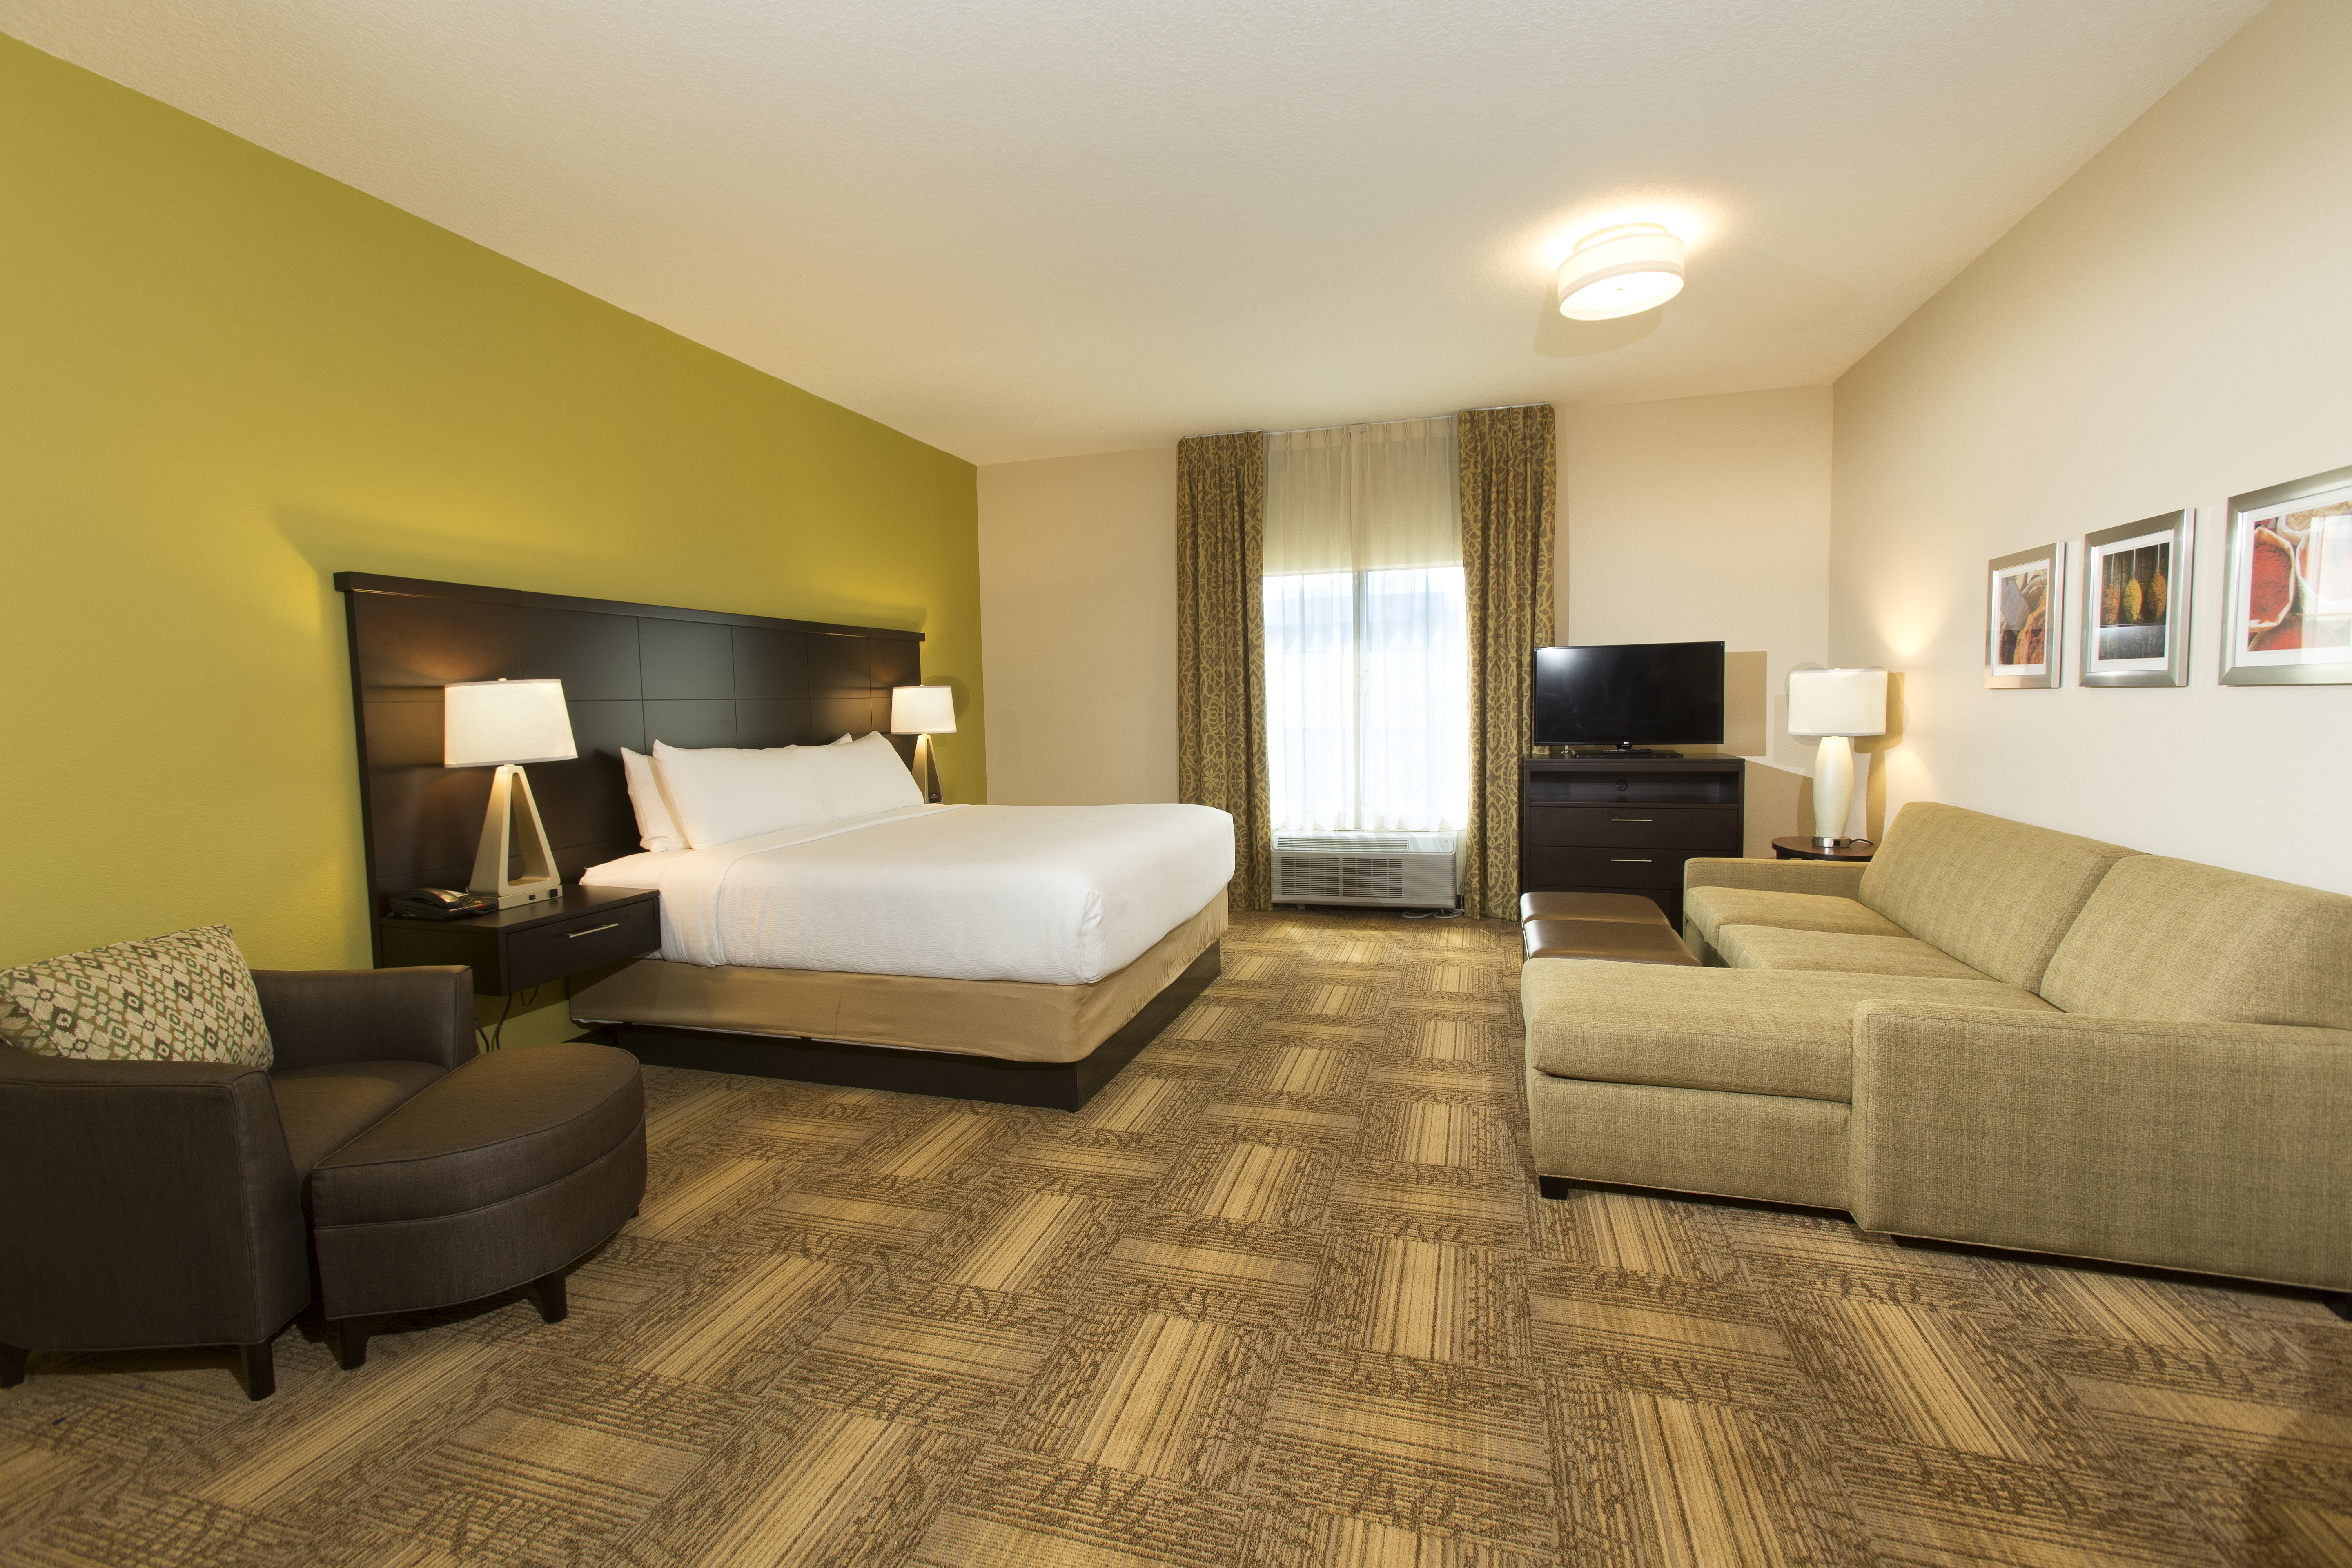 Our studio suites have space to relax and enjoy your visit.